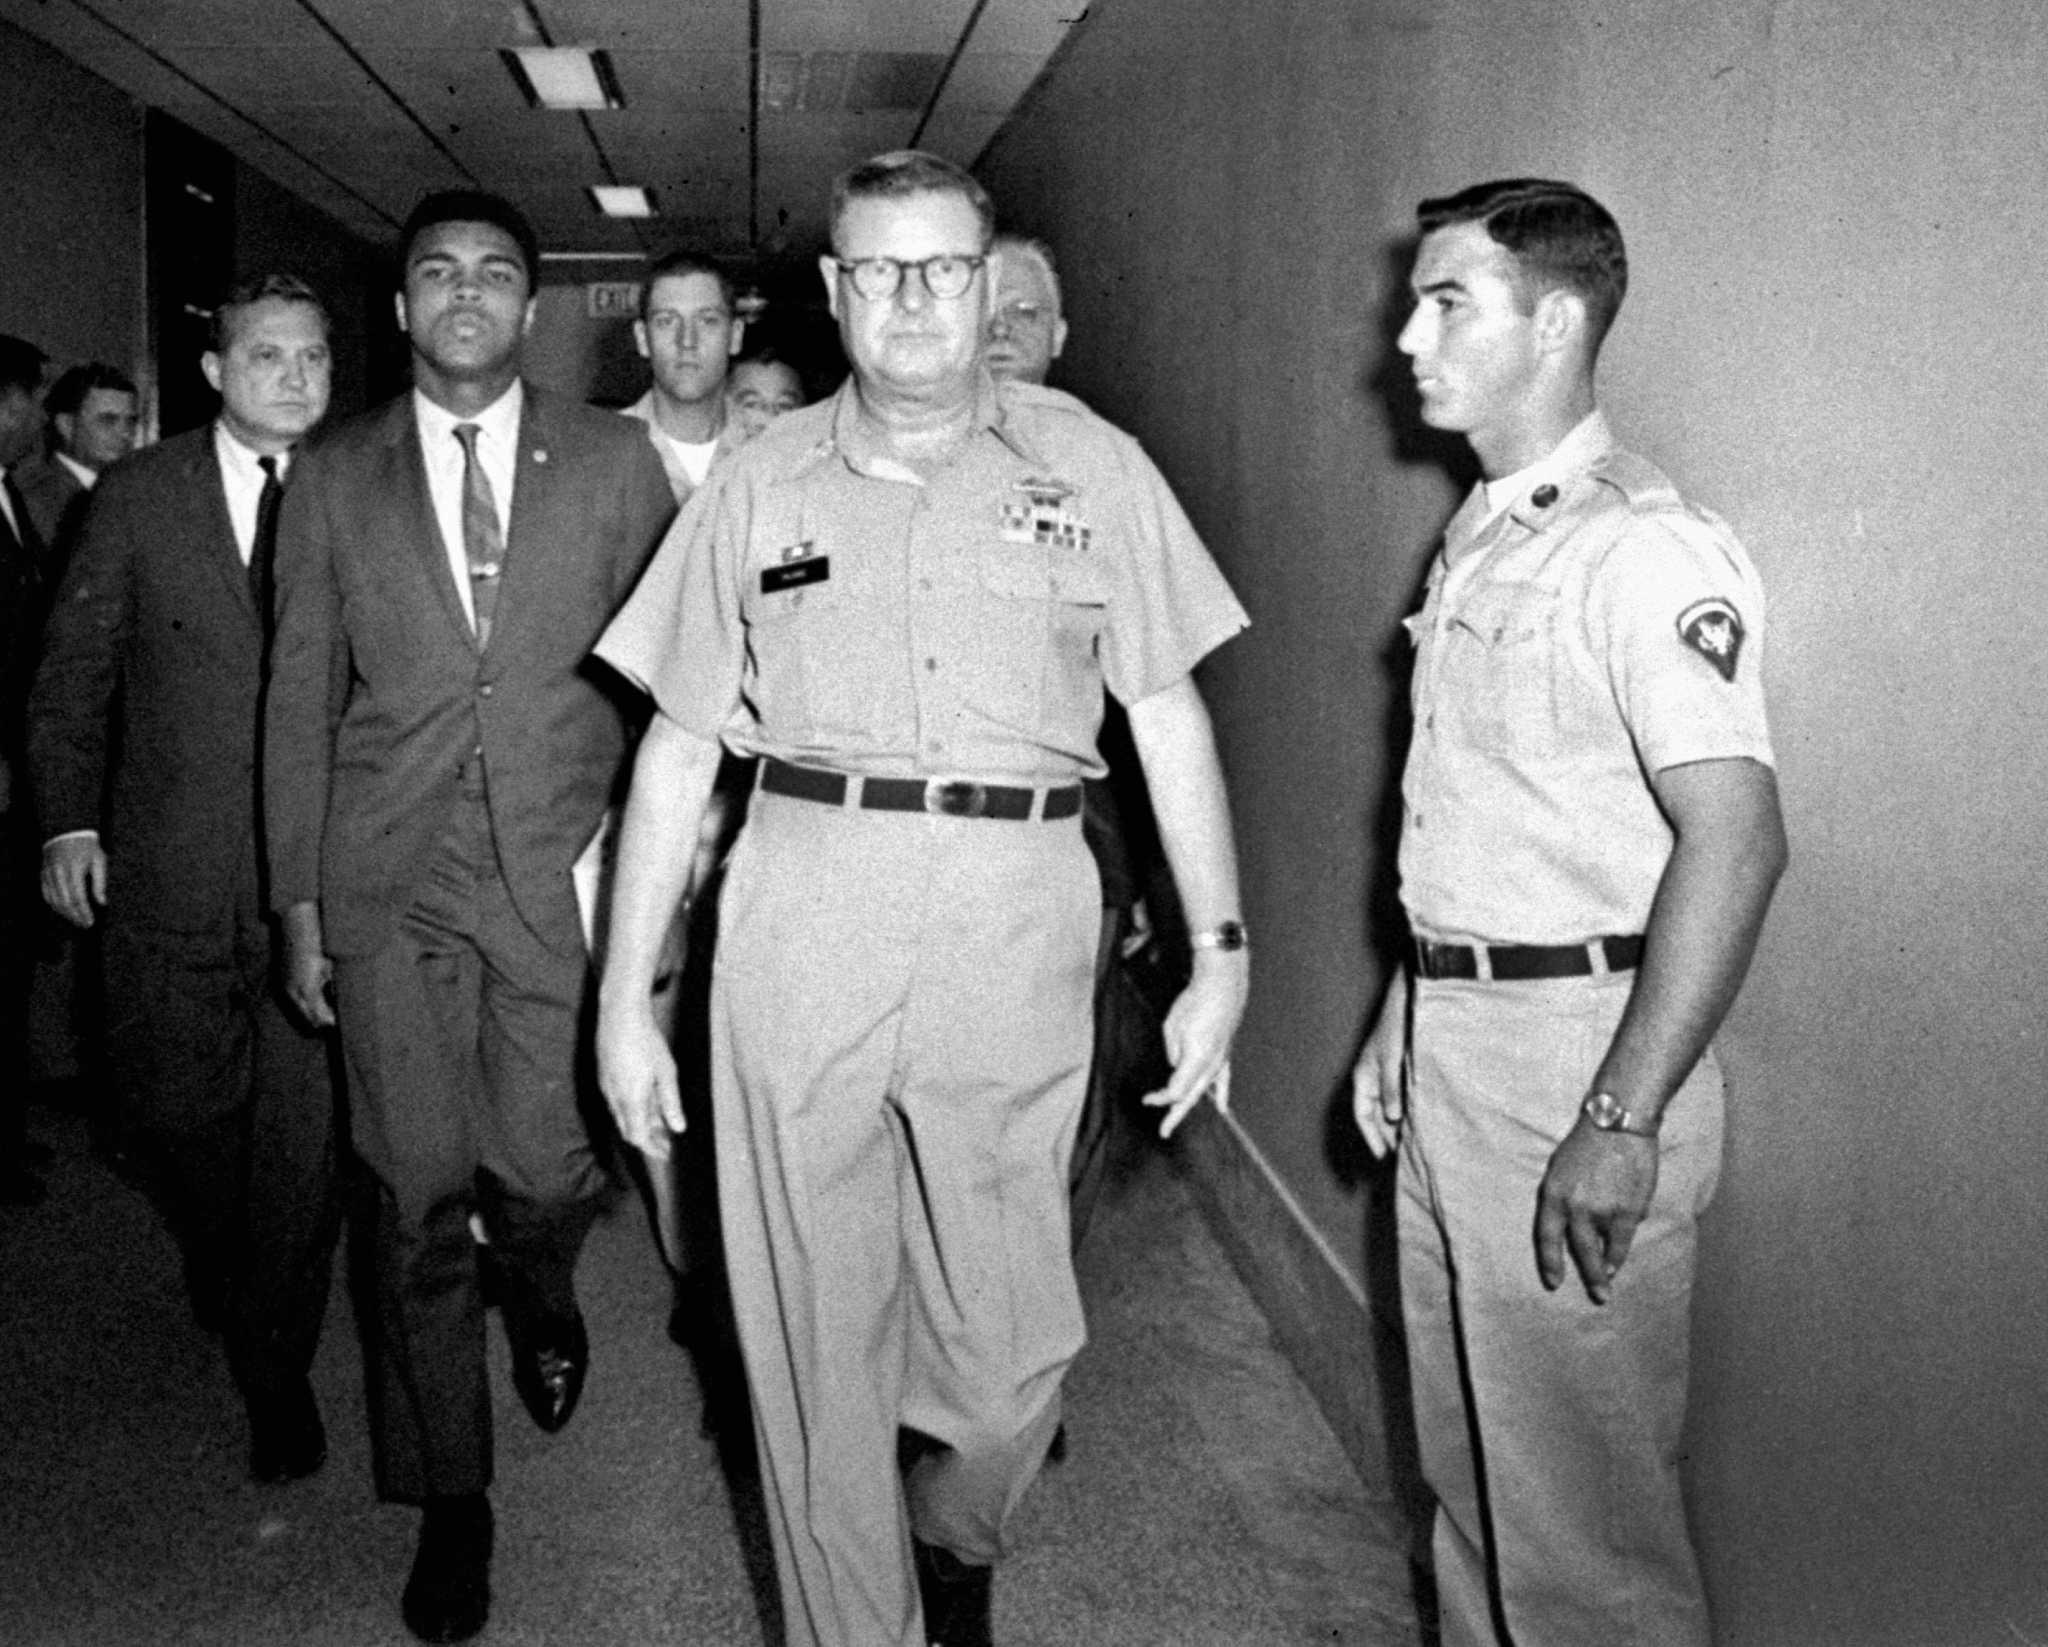 Ali: Conscientious Objector or Draft Dodger?